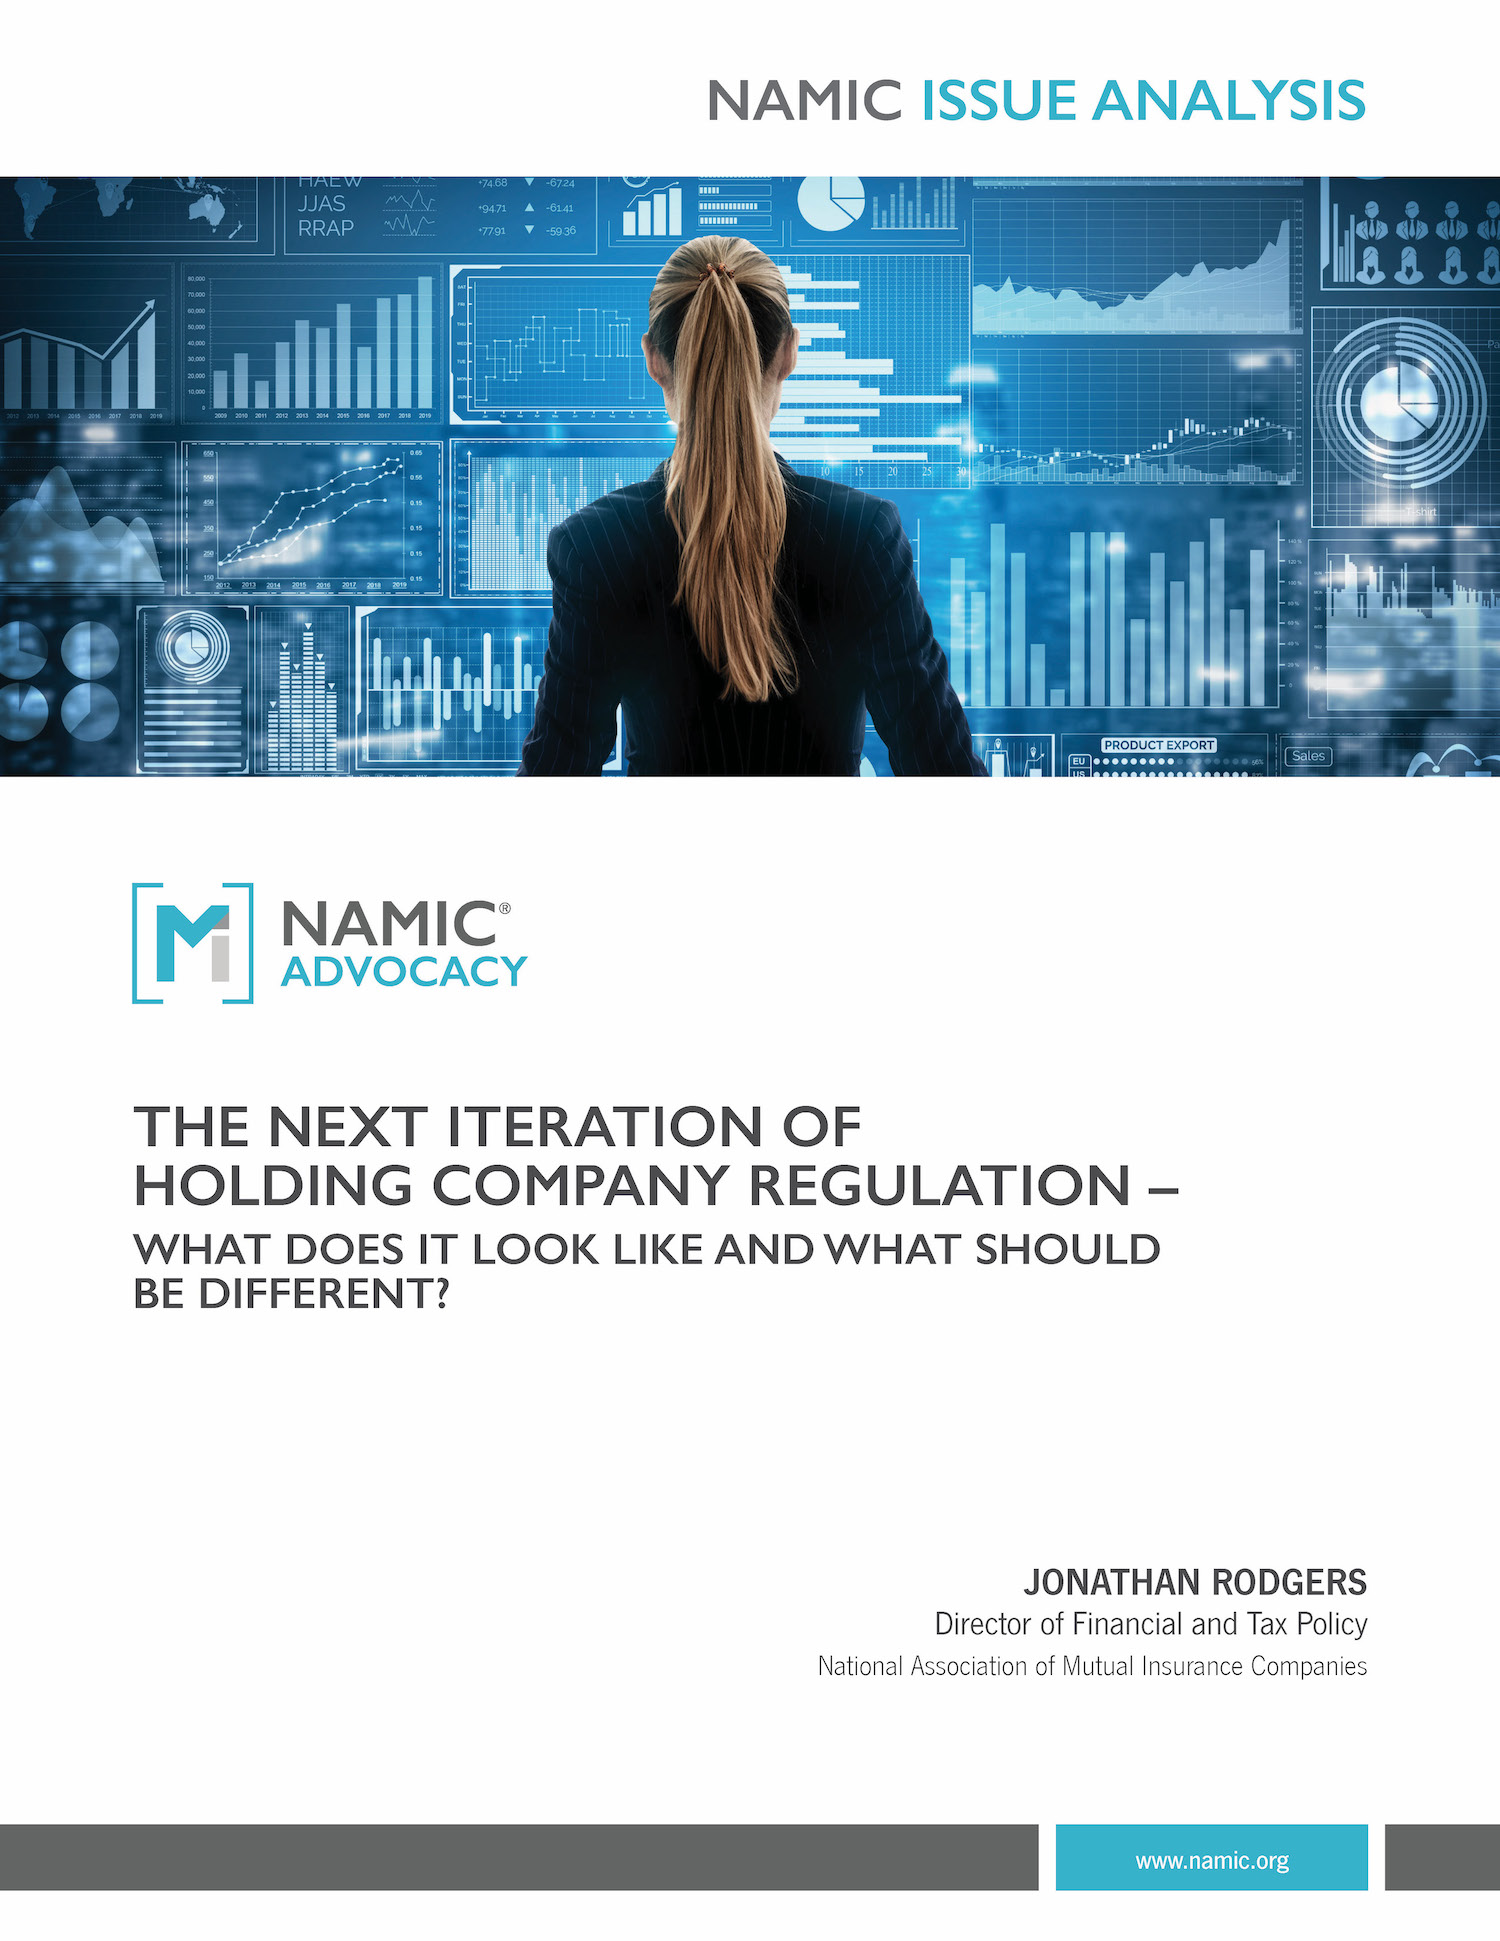 The Next Iteration of Holding Company Regulation — What Does it Look Like and What Should be Different? PDF